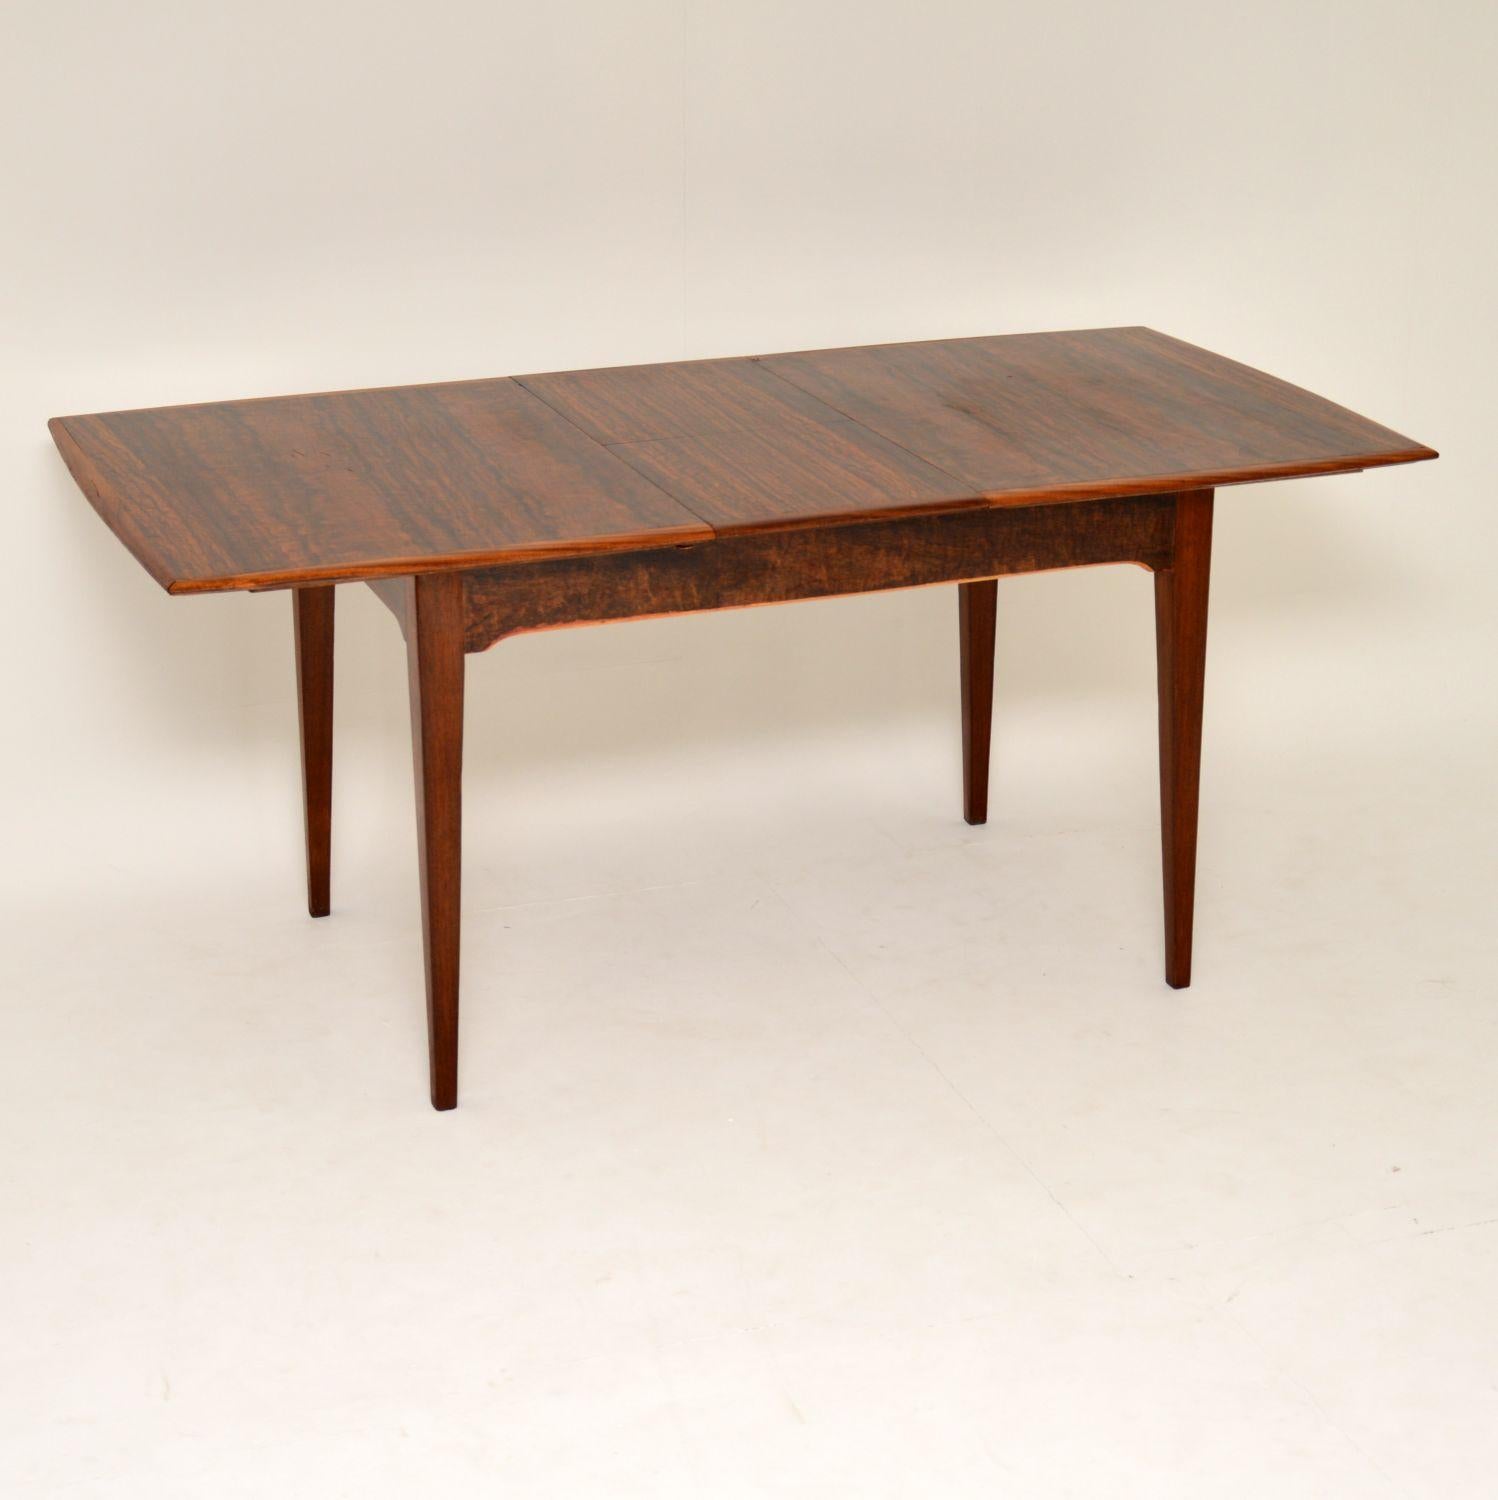 A smart and stylish vintage dining table in walnut, this was made by Alfred Cox in the 1960s. It is in nice condition for its age, it looks like it was restored by the previous owner, so has a nice rich and even colour, with beautiful grain